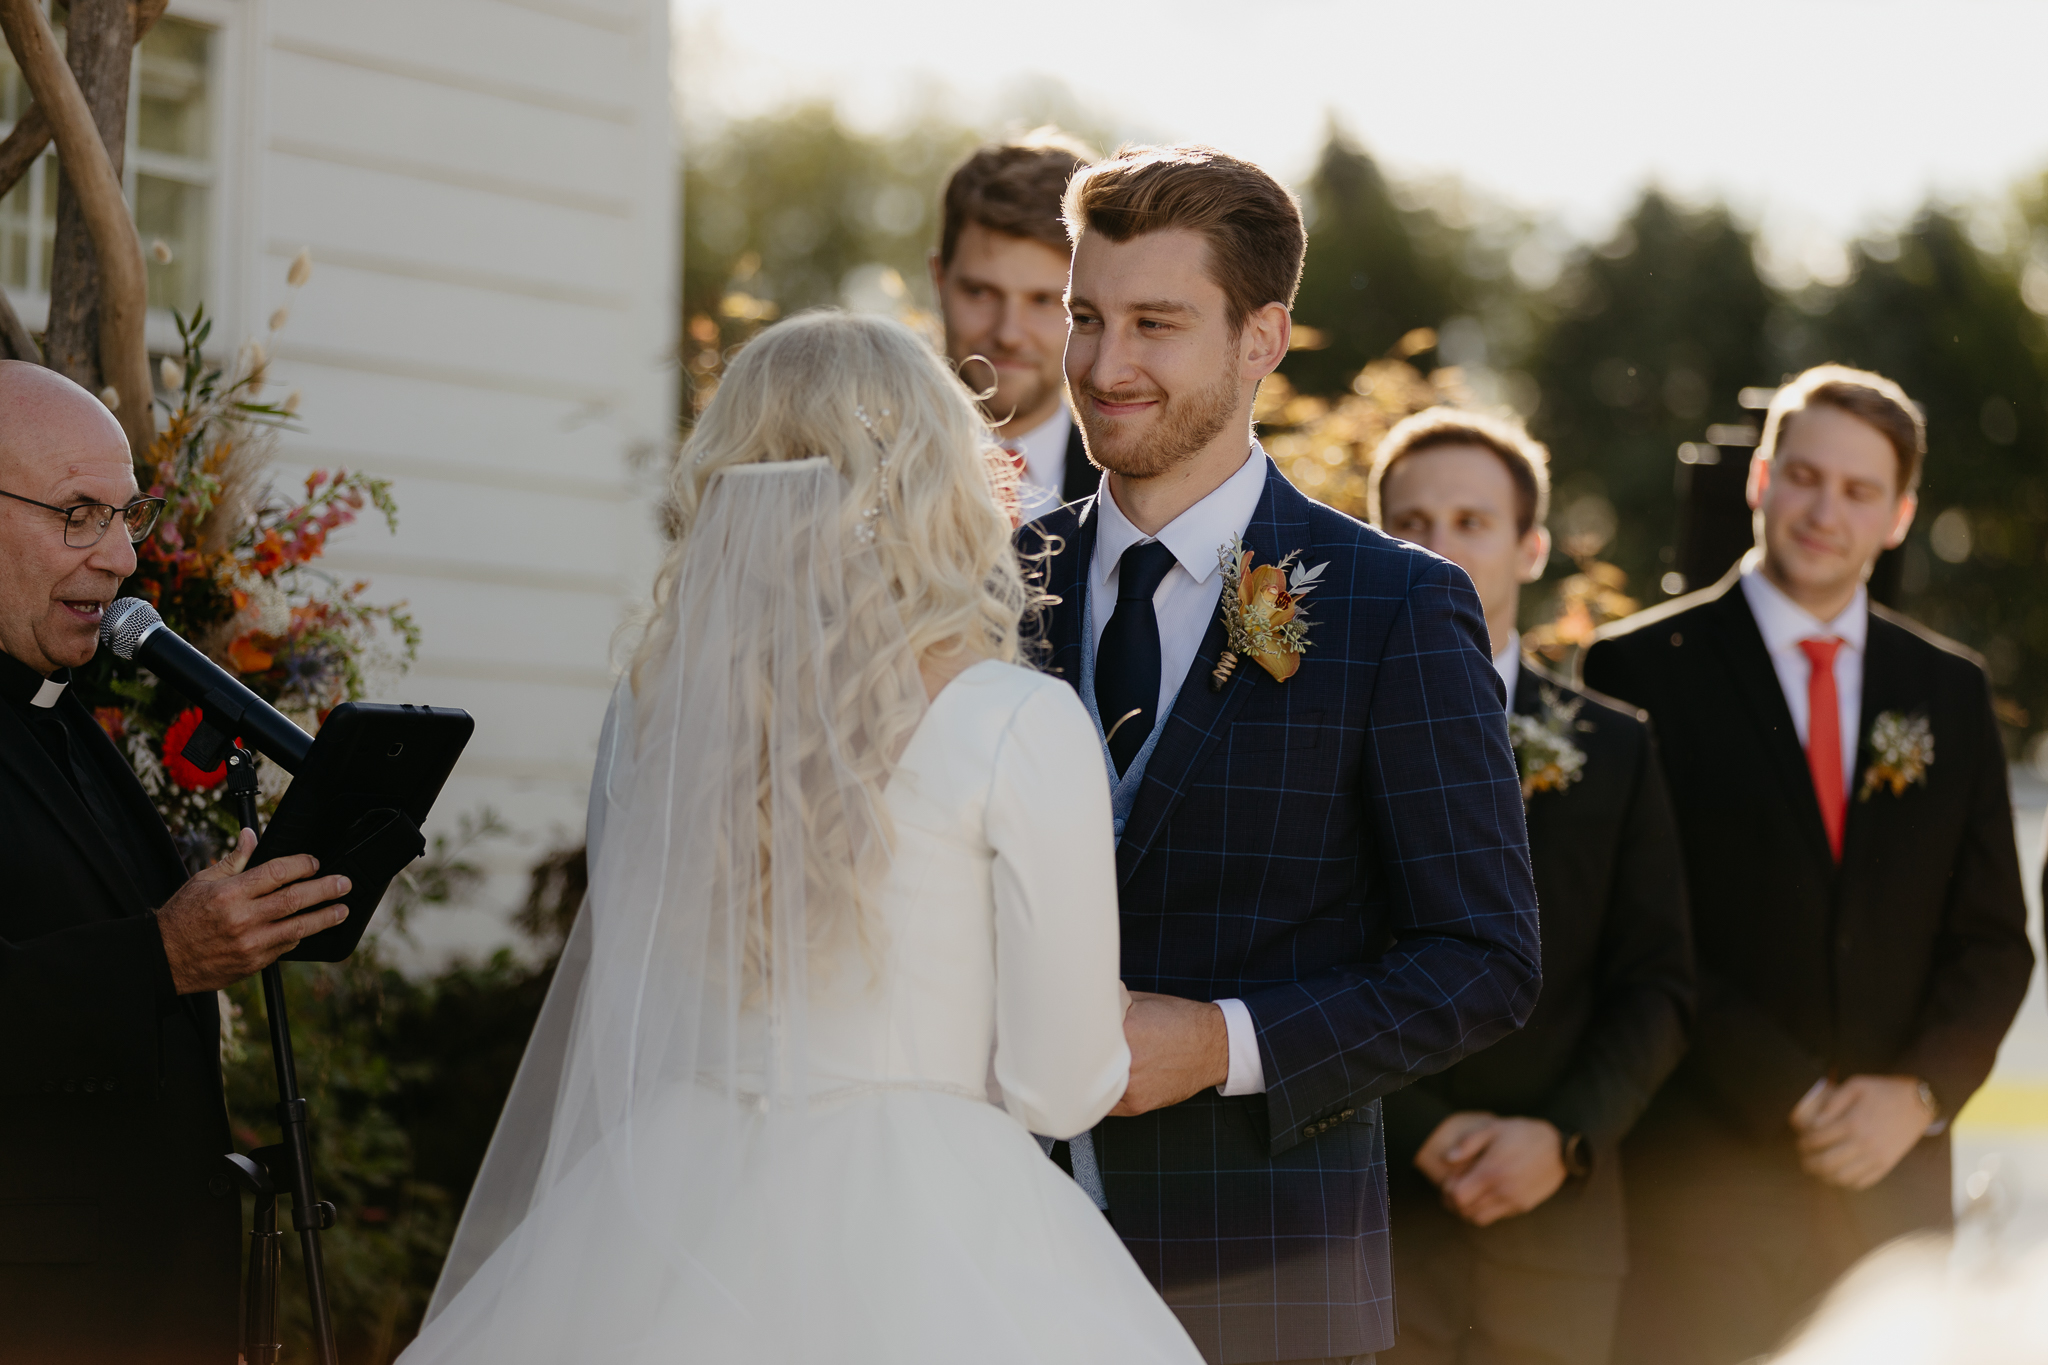 Groom smiling at his bride and holding his hands while exchanging vows at their outdoor wedding ceremony